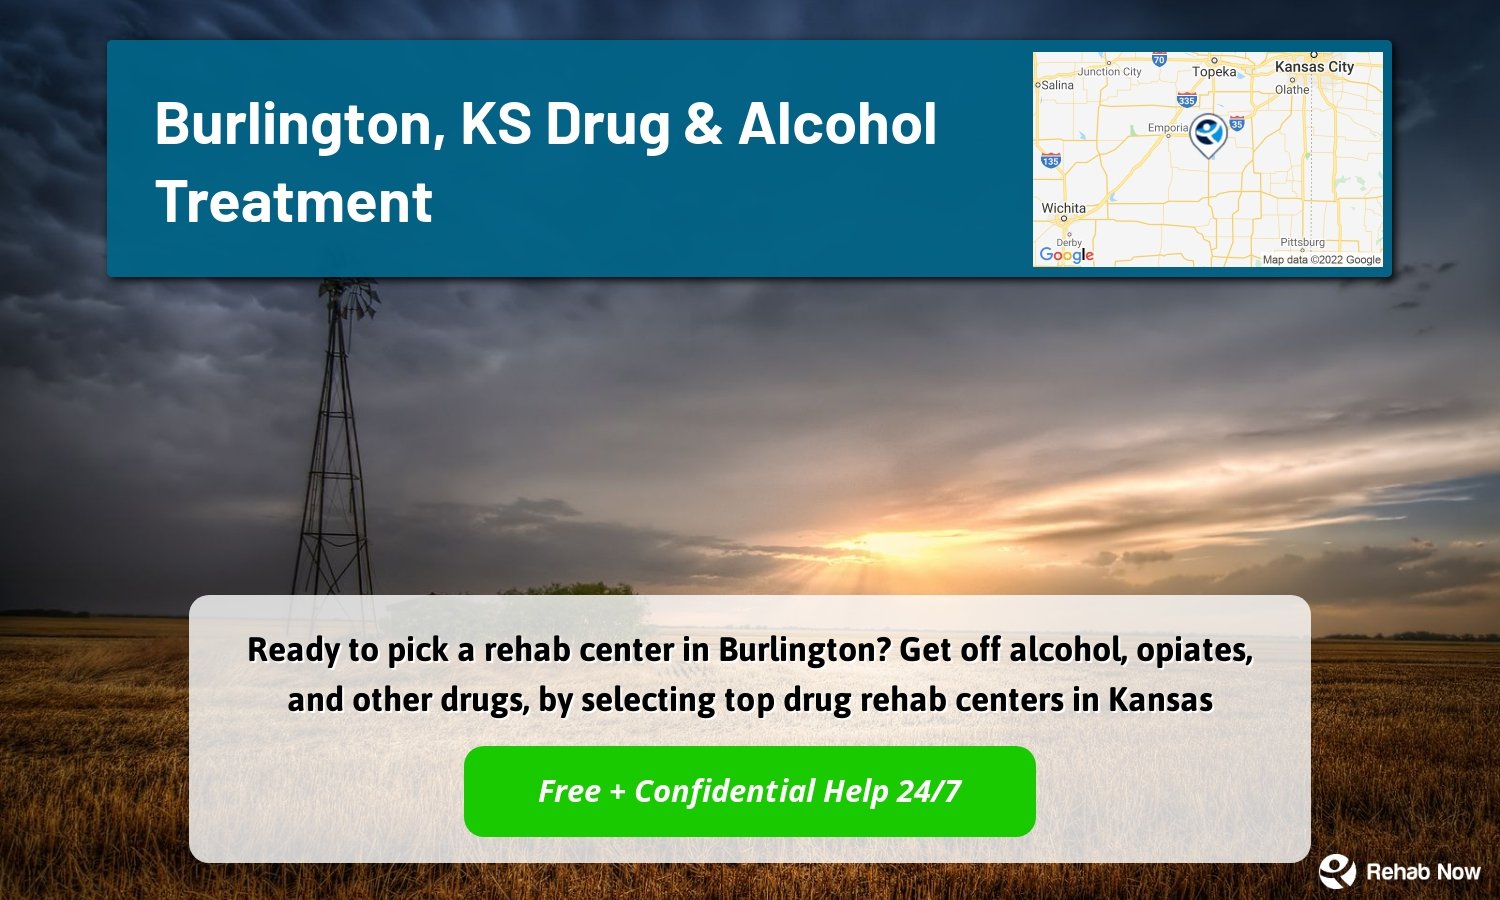 Ready to pick a rehab center in Burlington? Get off alcohol, opiates, and other drugs, by selecting top drug rehab centers in Kansas